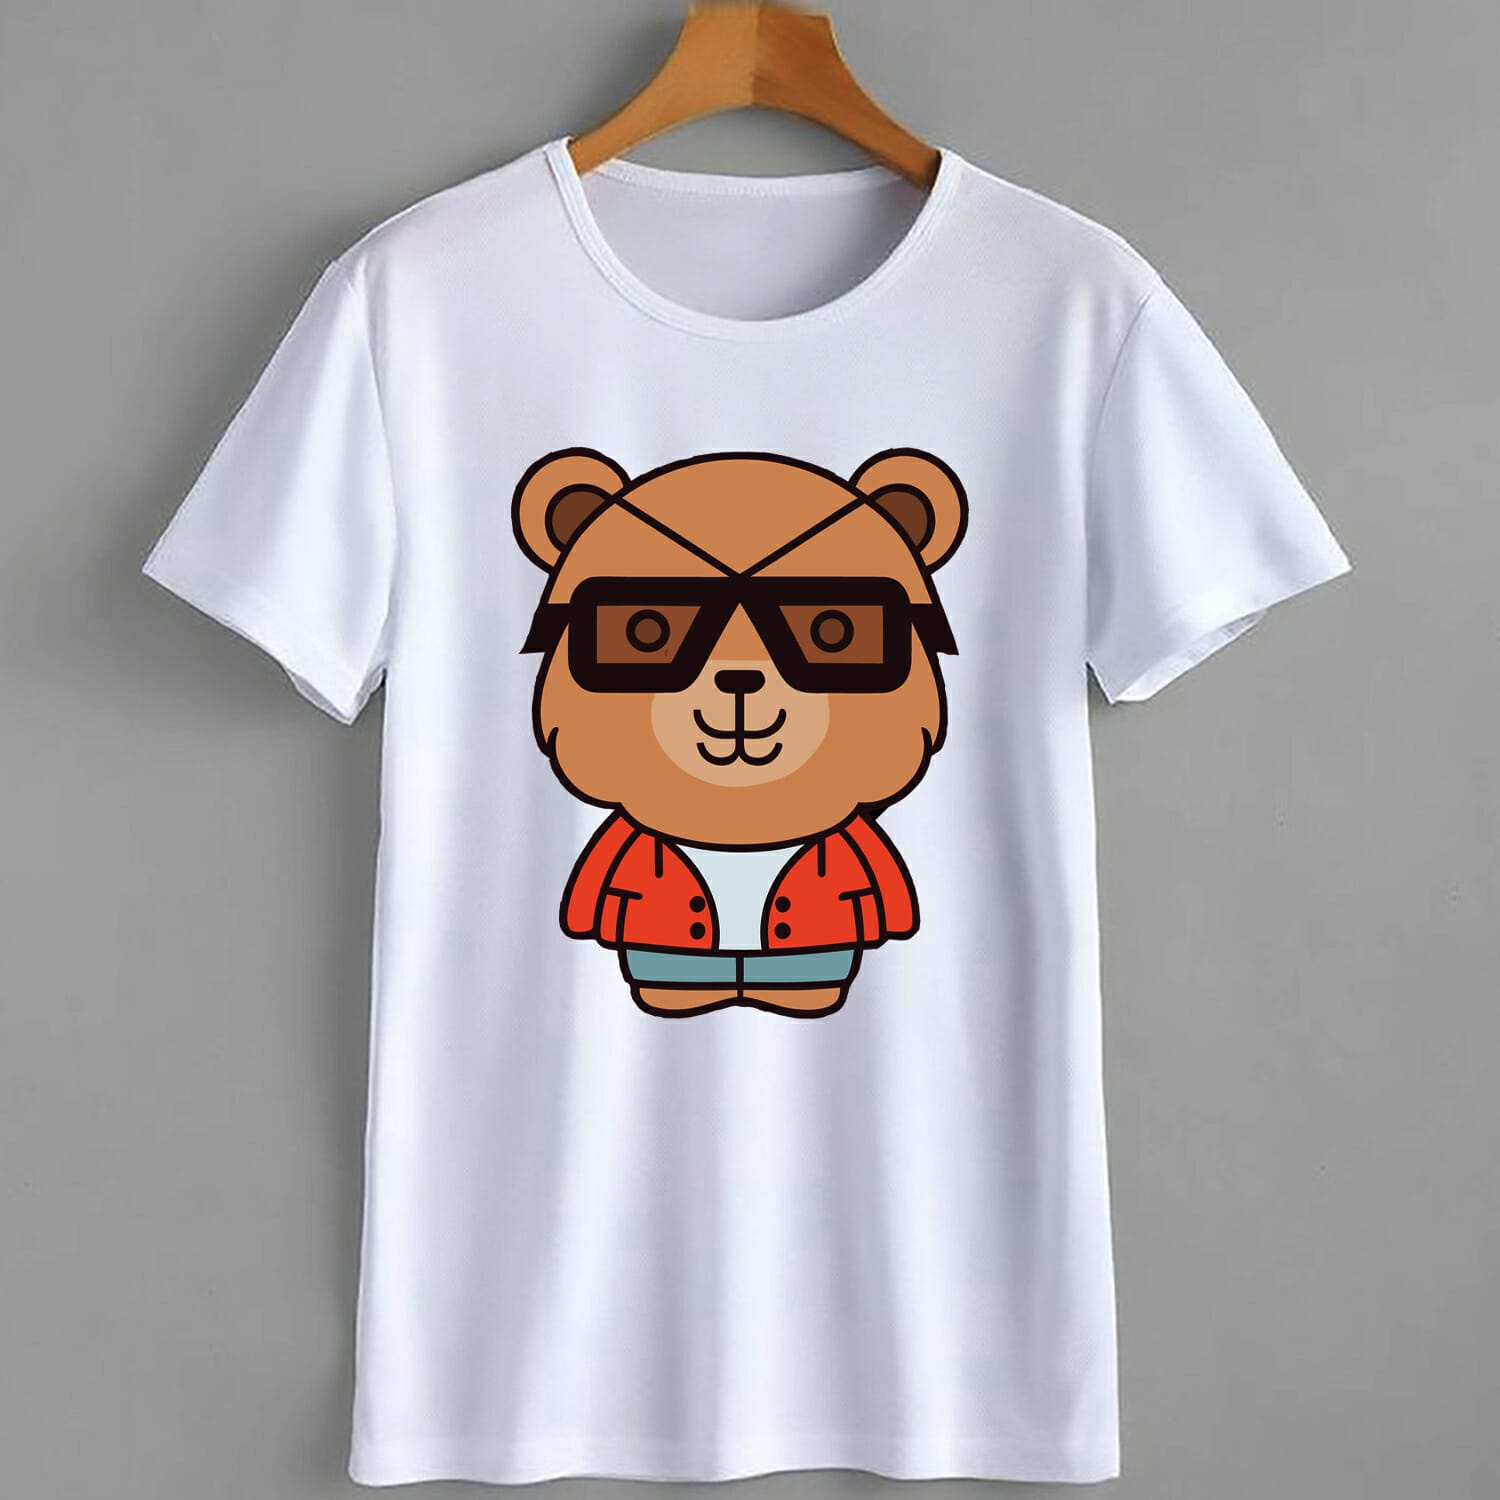 Teddy Bear With Glasses T-Shirt Design